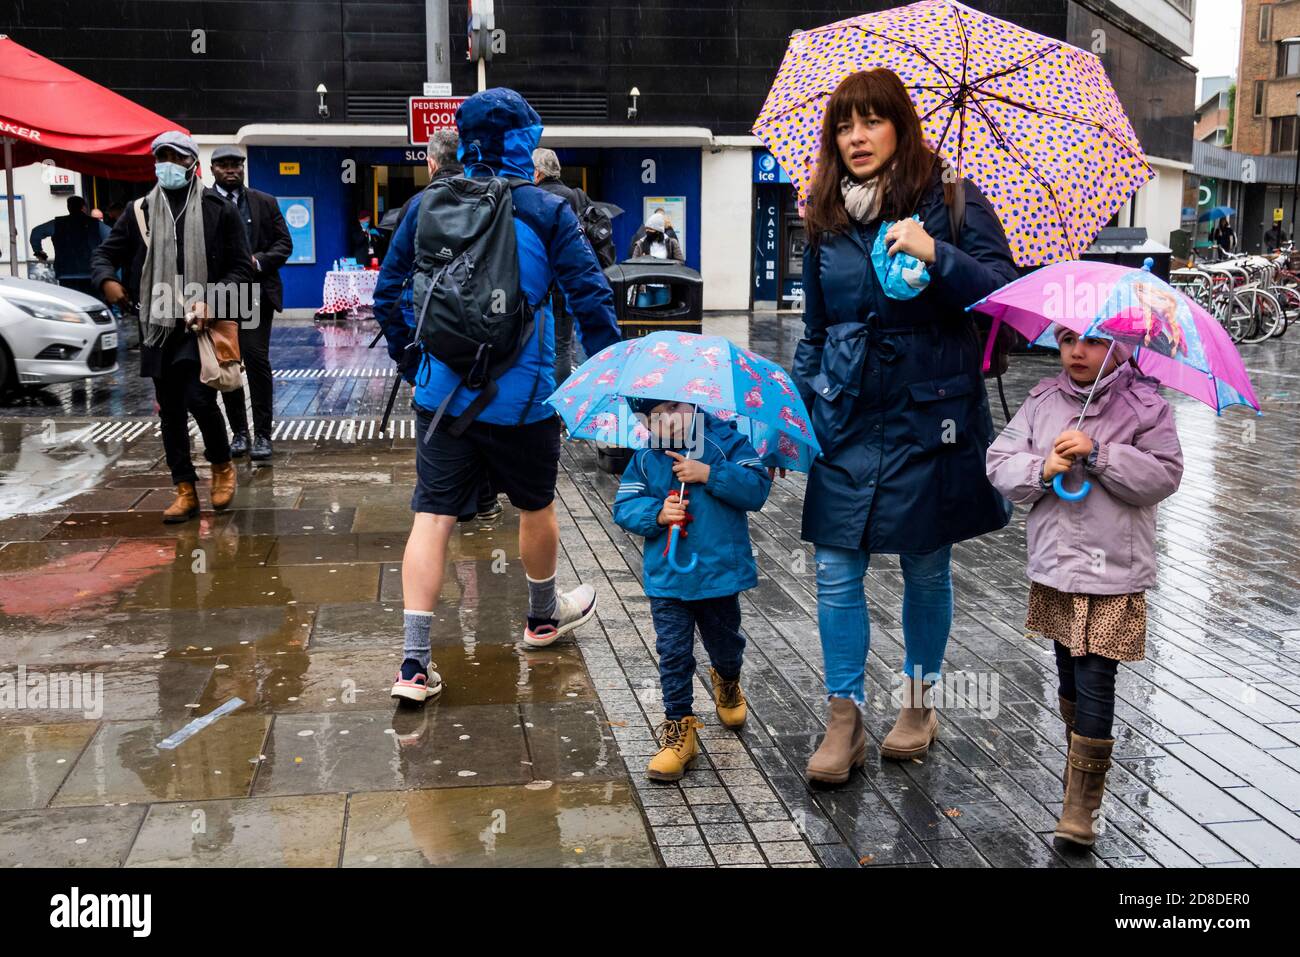 London, UK. 29th Oct, 2020. The rain comes down as a young family leave the station - It is London Poppy Day and a veteran collects for the Royal British Legion, as a steady flow of passengers exits Sloane Square Tube Station. Travellers mostly wear masks after they become mandatory. Credit: Guy Bell/Alamy Live News Stock Photo